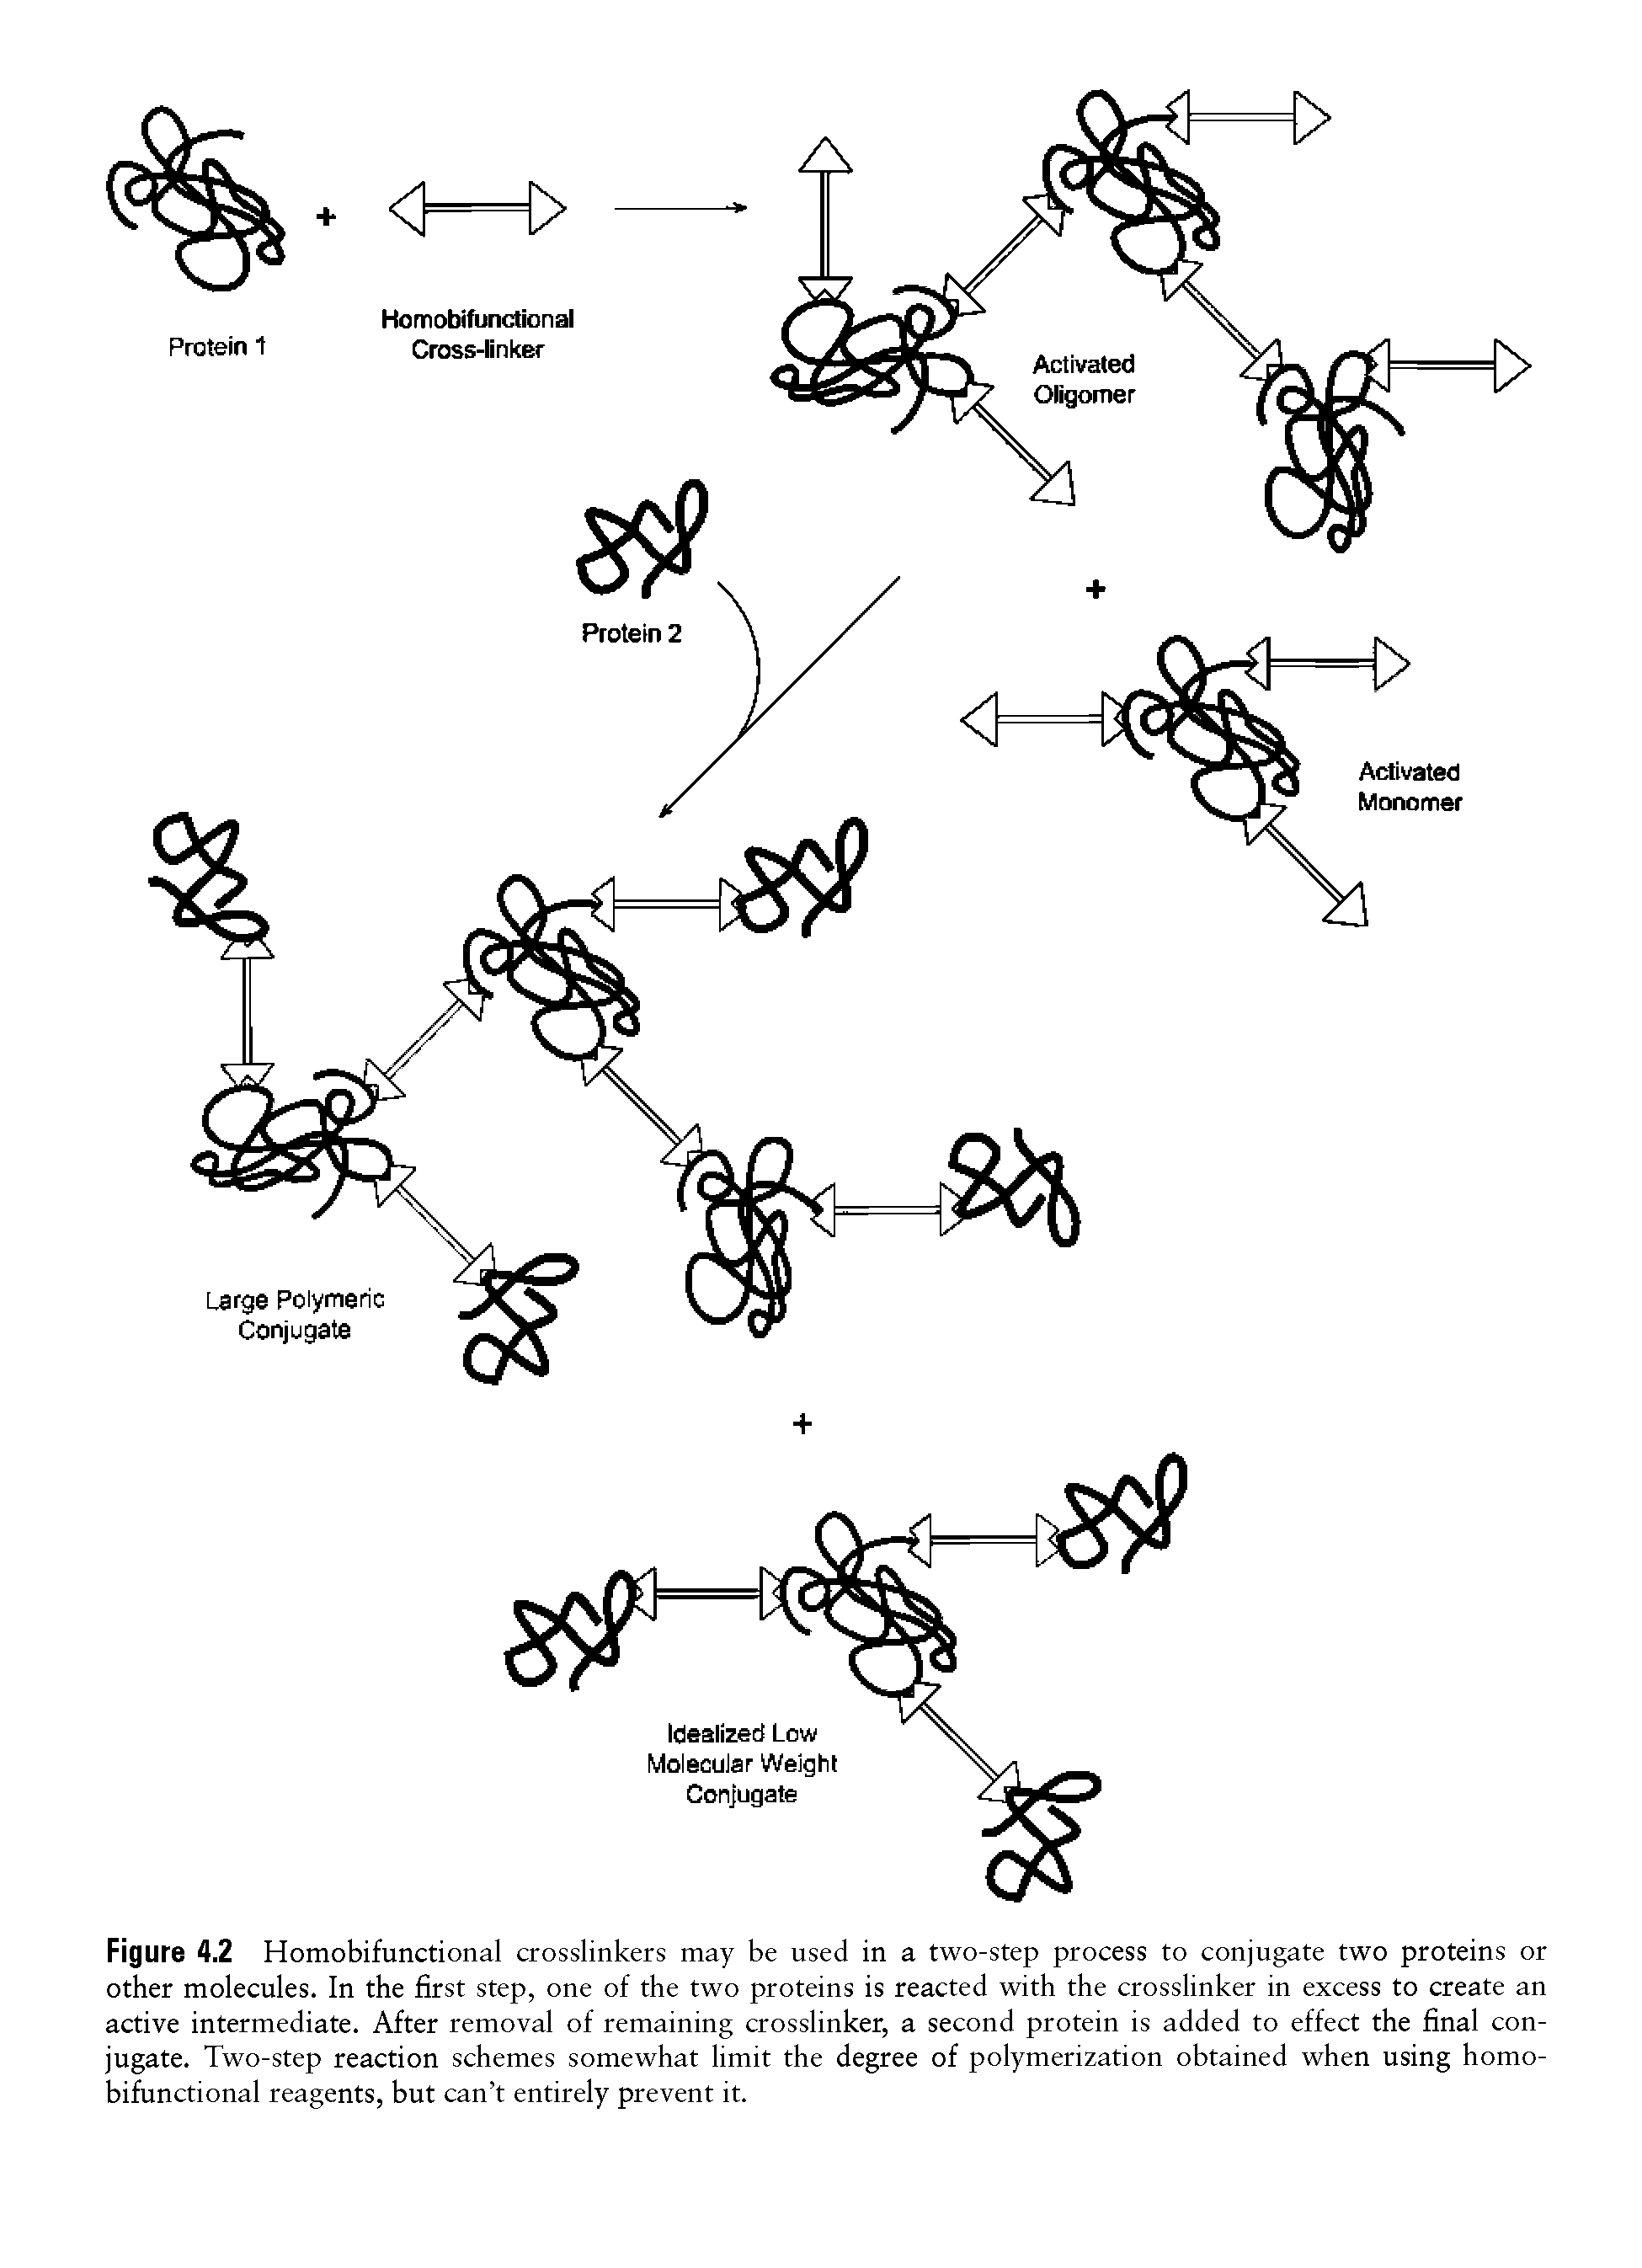 Figure 4.2 Homobifunctional crosslinkers may be used in a two-step process to conjugate two proteins or other molecules. In the first step, one of the two proteins is reacted with the crosslinker in excess to create an active intermediate. After removal of remaining crosslinker, a second protein is added to effect the final conjugate. Two-step reaction schemes somewhat limit the degree of polymerization obtained when using homobifunctional reagents, but can t entirely prevent it.